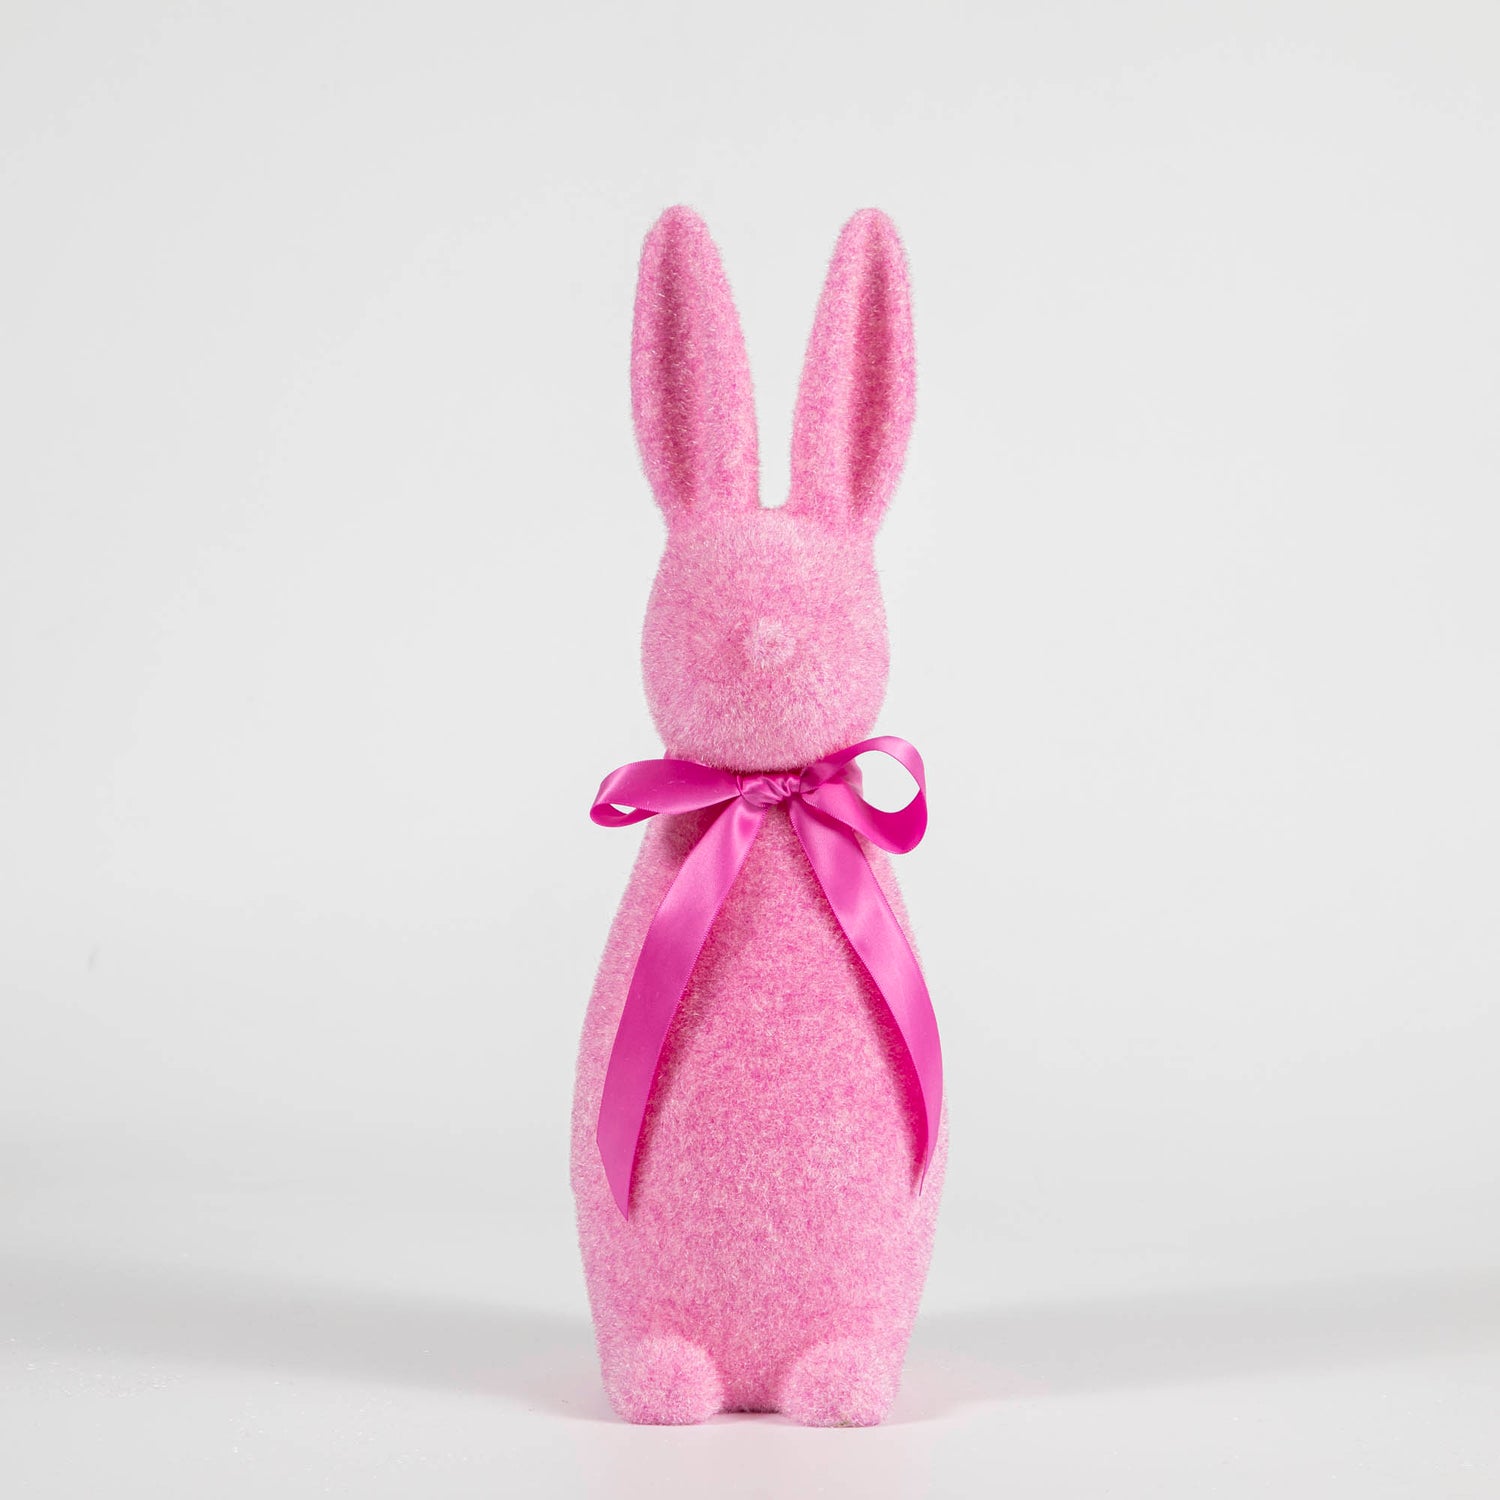 A Medium Flocked Pastel Button Nose Bunny from Glitterville, perfect for Easter decorations.